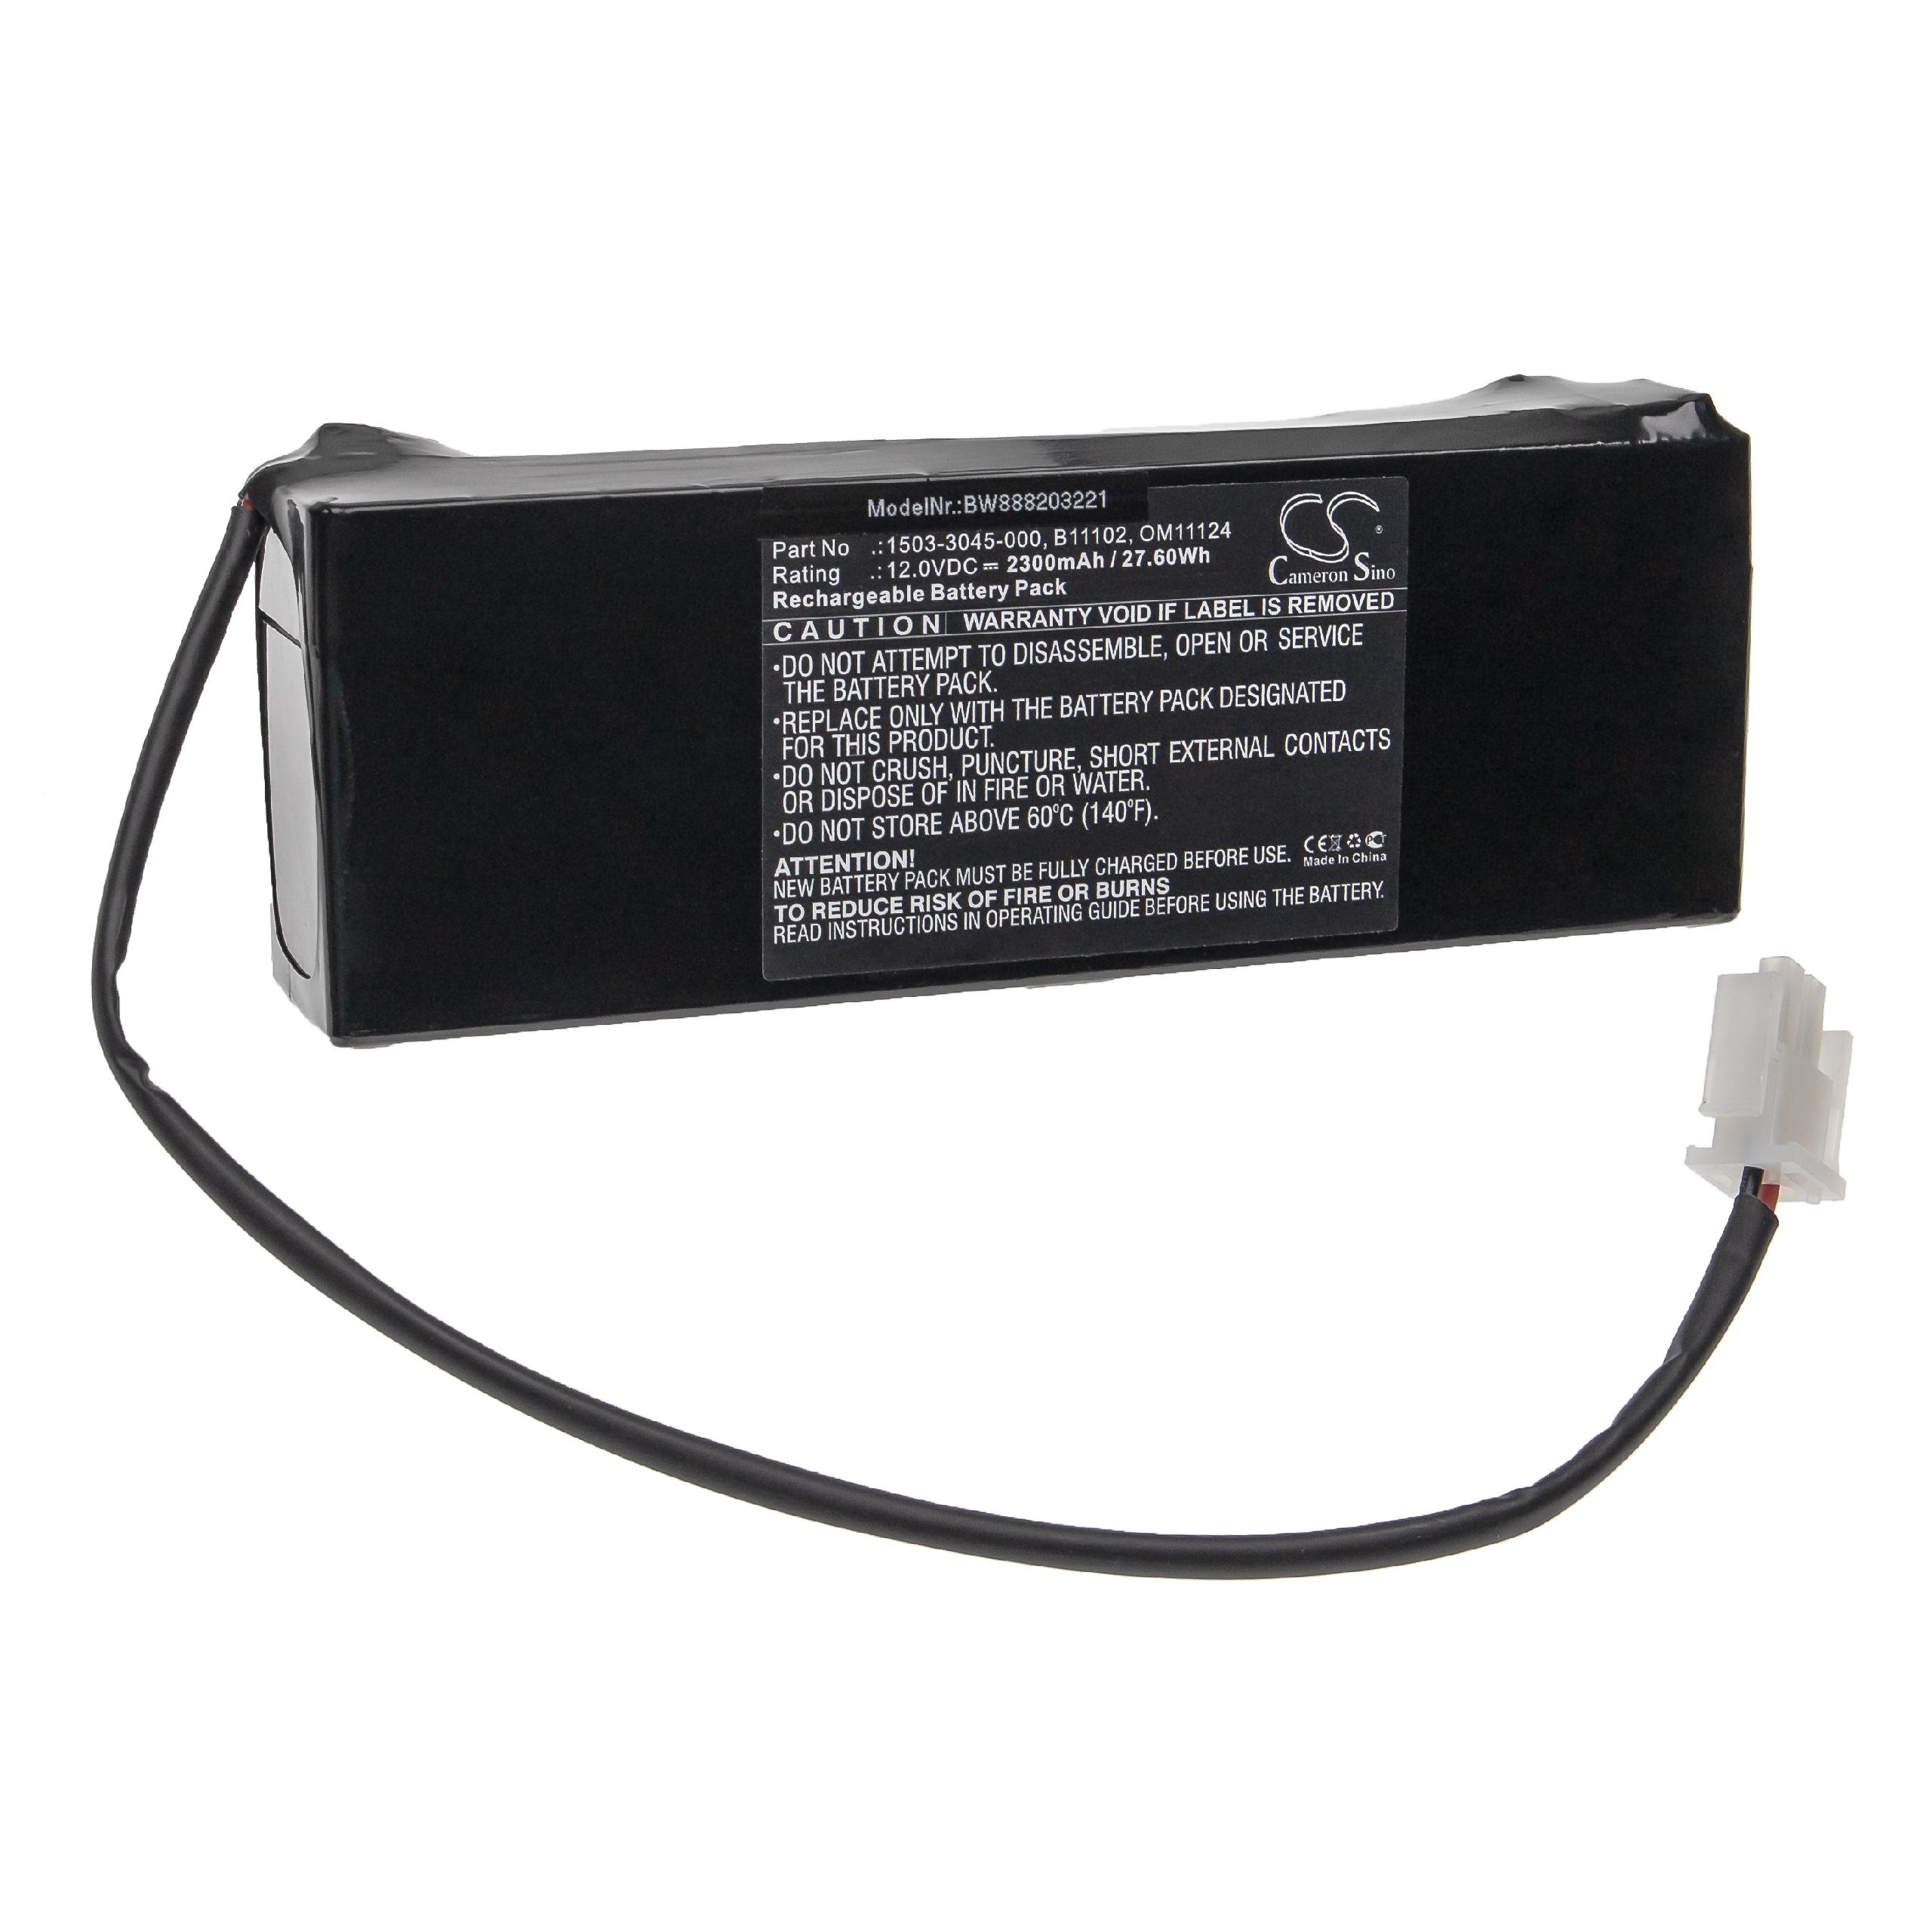 Medical Equipment Battery Replacement for GE 1503-3045-000, OM11124, B11102, 5899 - 2300mAh 12V AGM